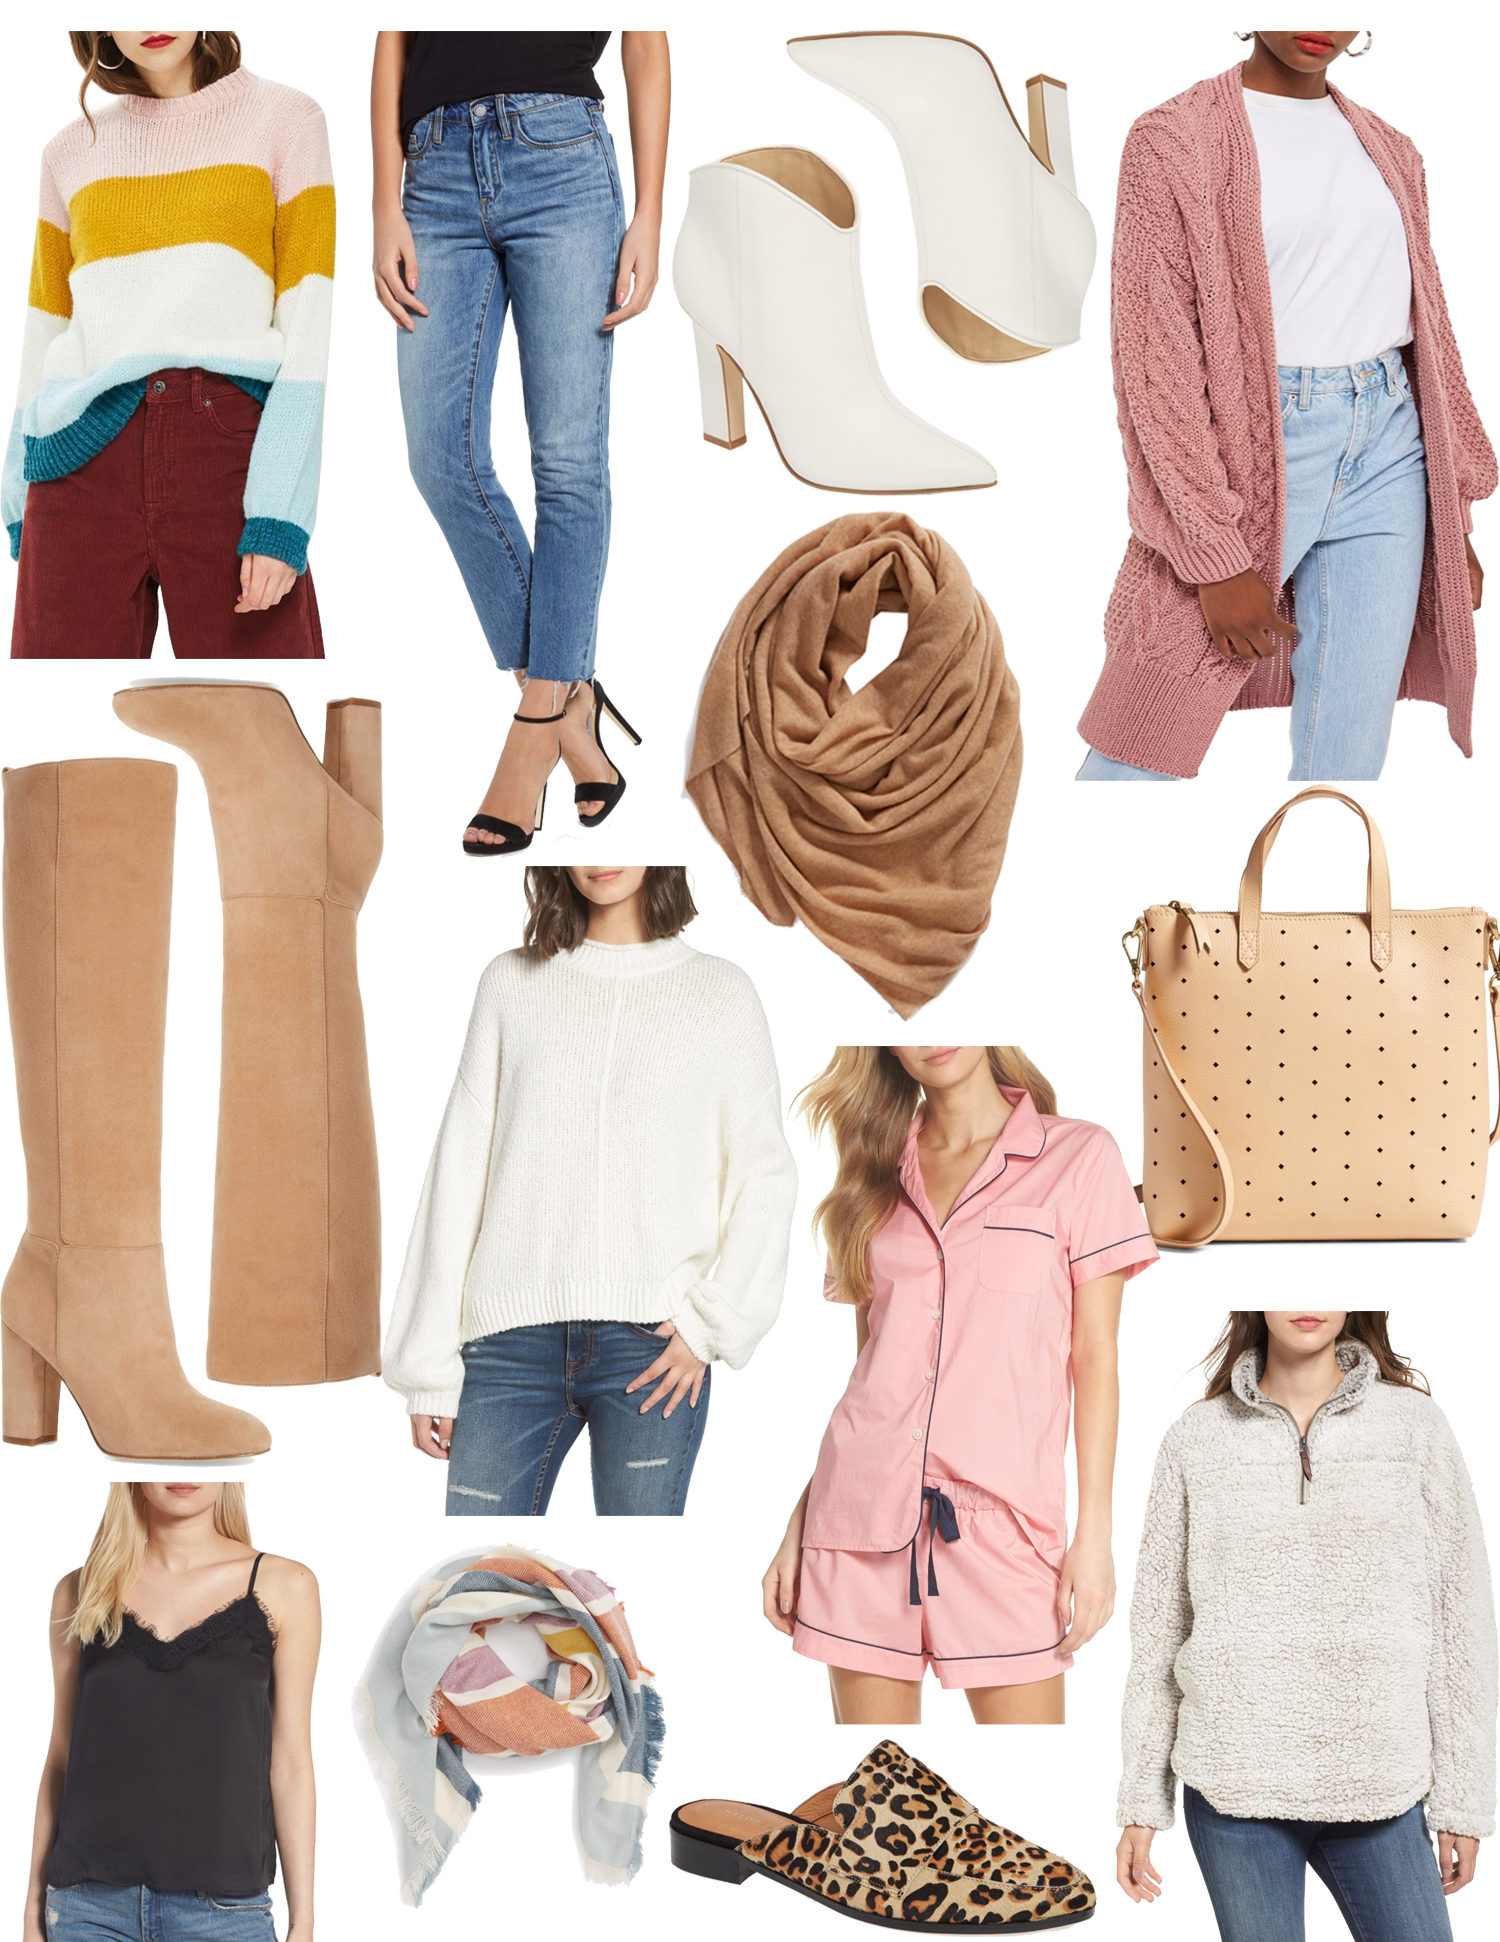 Nordstrom-Anniversary-Sale-2018, Nordstrom-Early-Access, Lo-Murphy, Nordstrom-Anniversary-Sale-Best-Buys